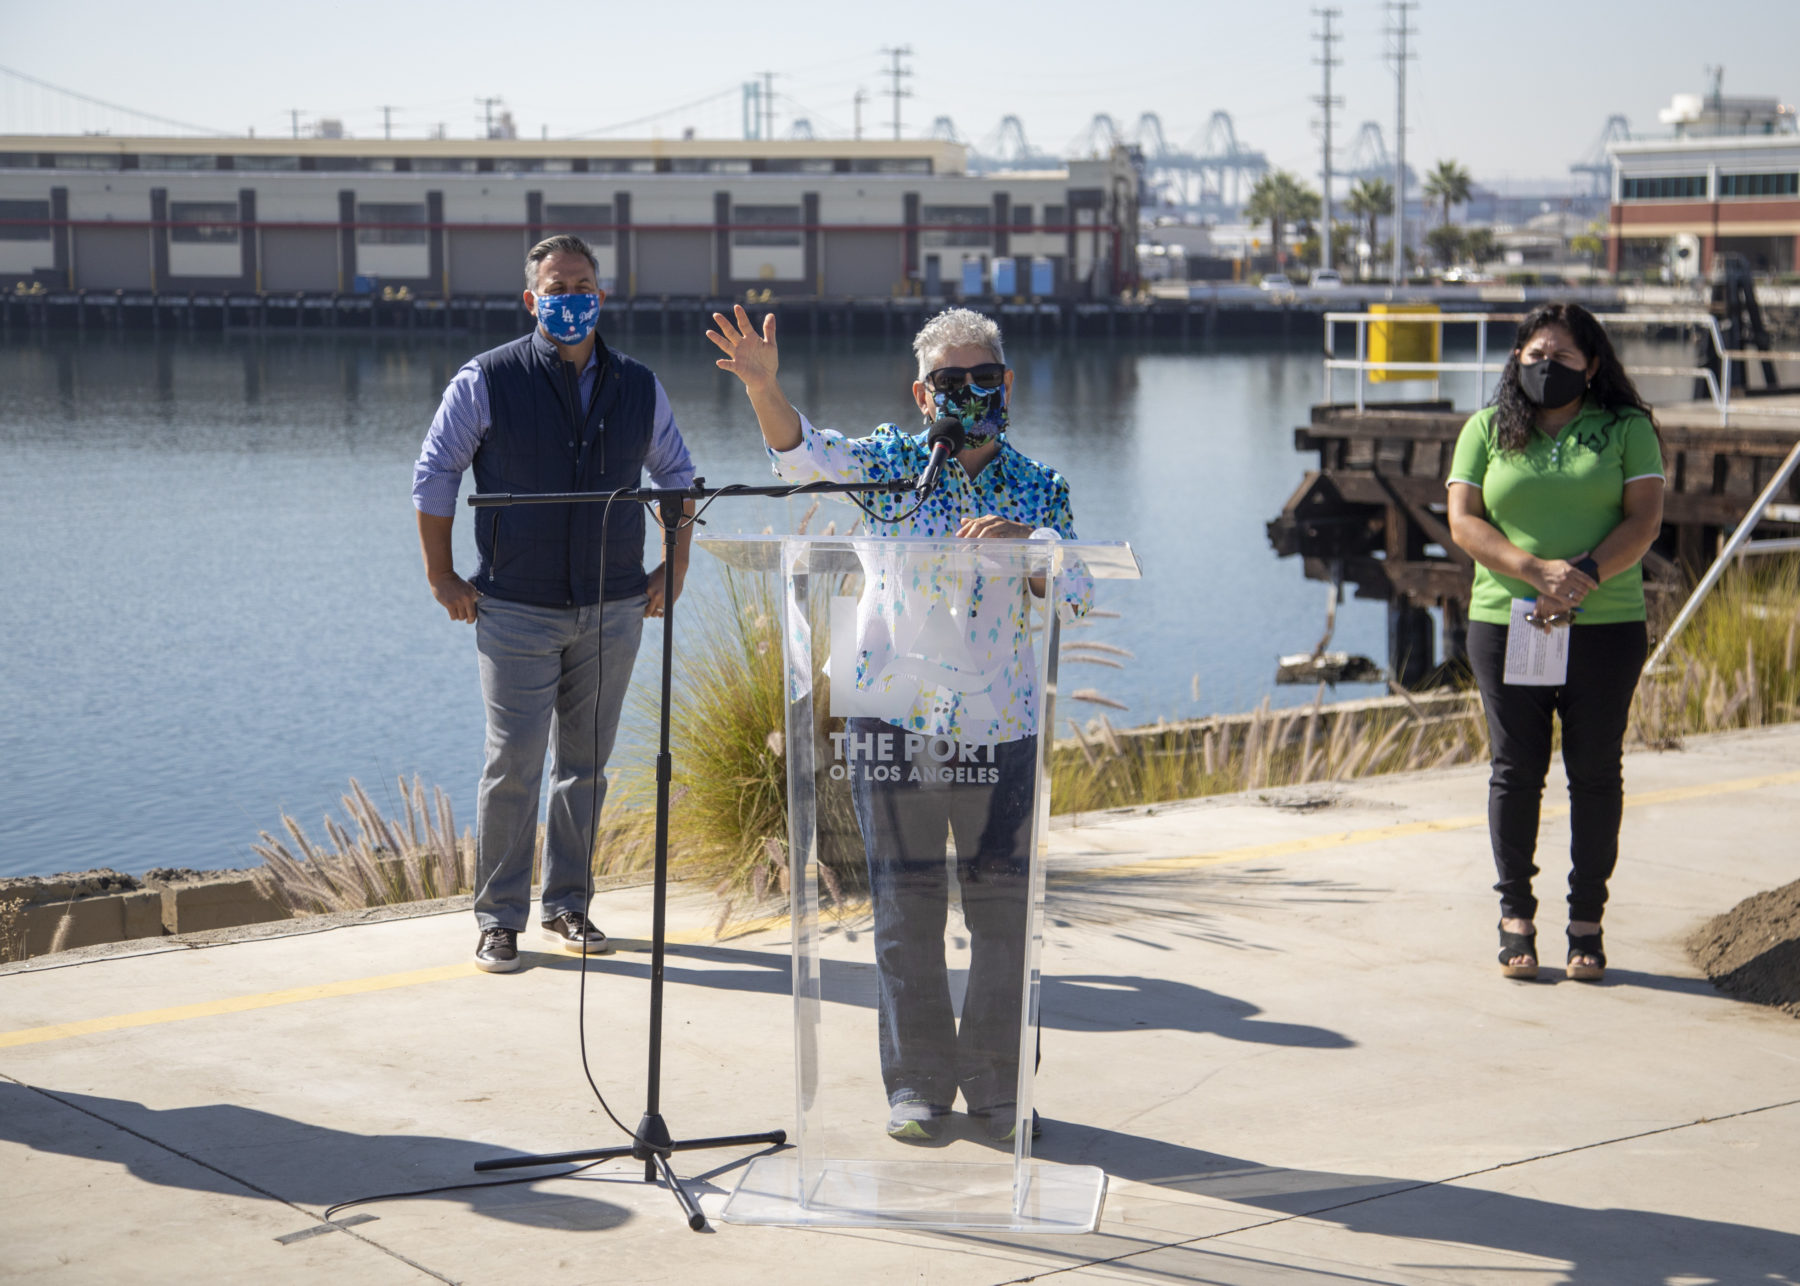 Woman speaking at podium in front of the Port